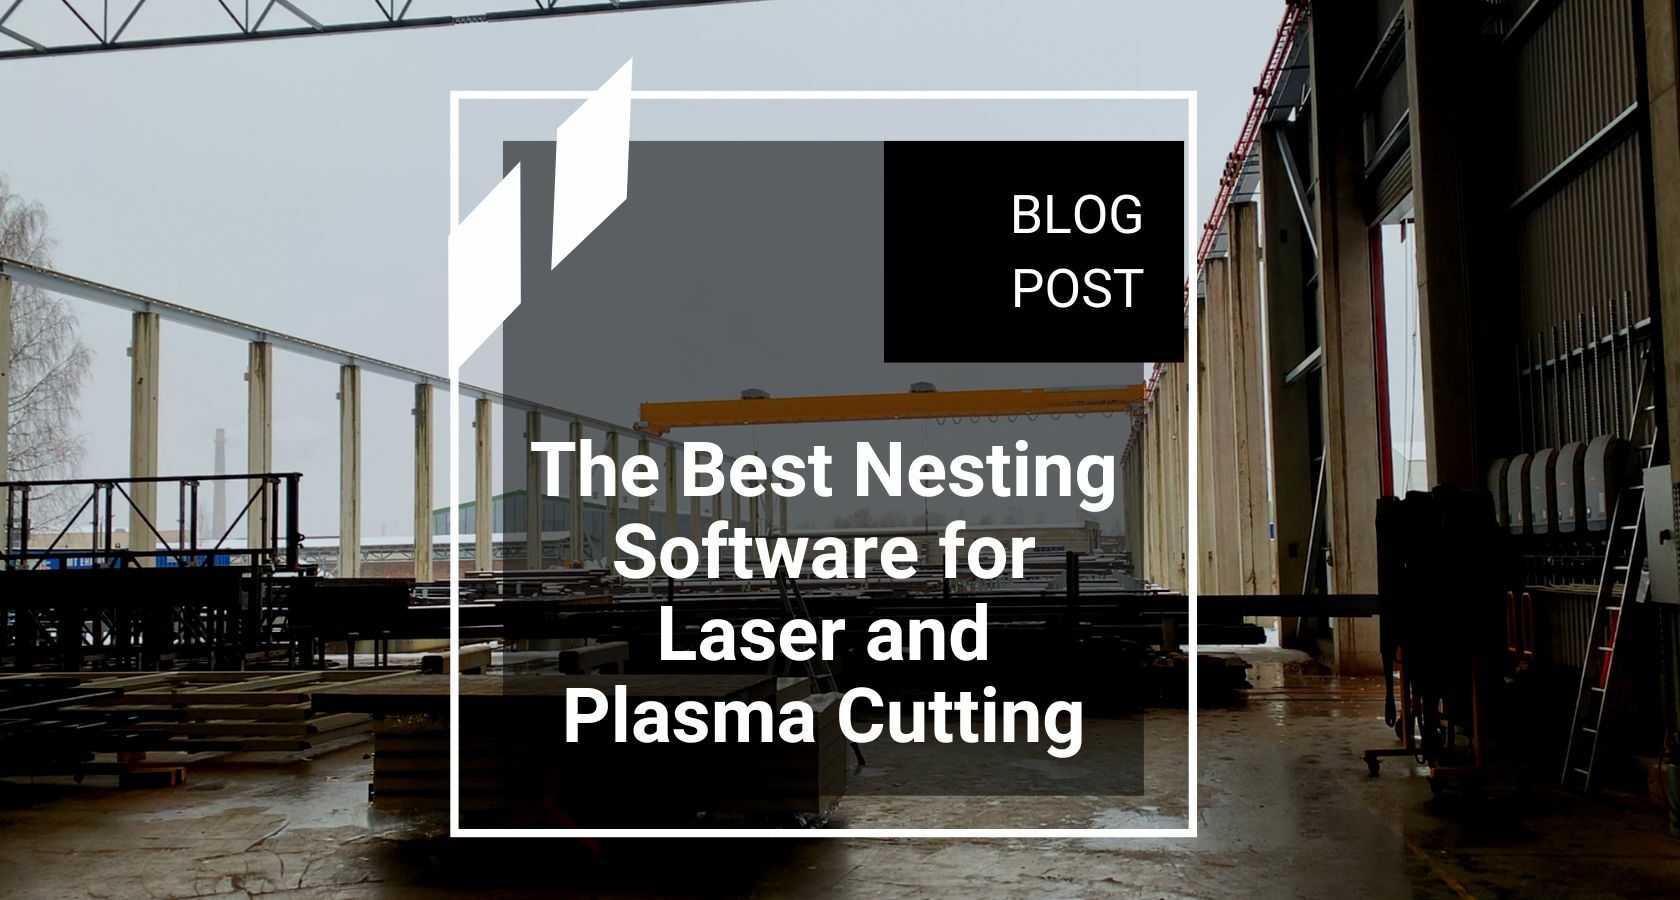 The Best Nesting Software for Laser and Plasma Cutting